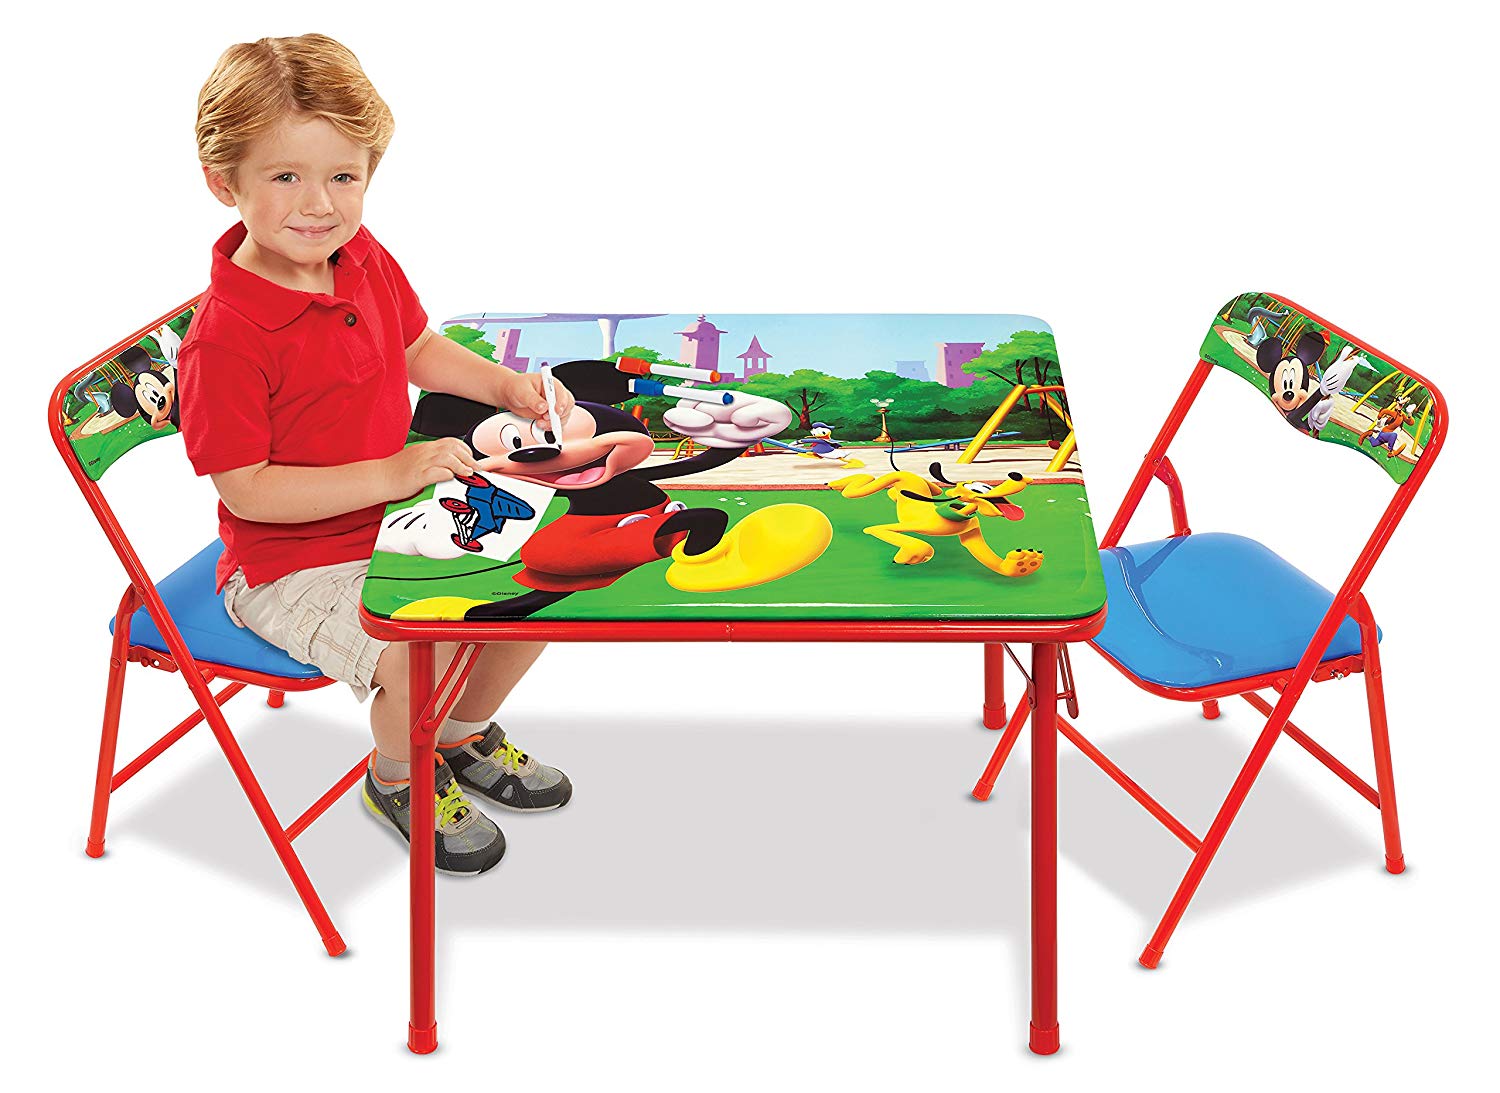 Mickey Mouse Clubhouse Activity Table Playset $24.99 (reg $39.99)